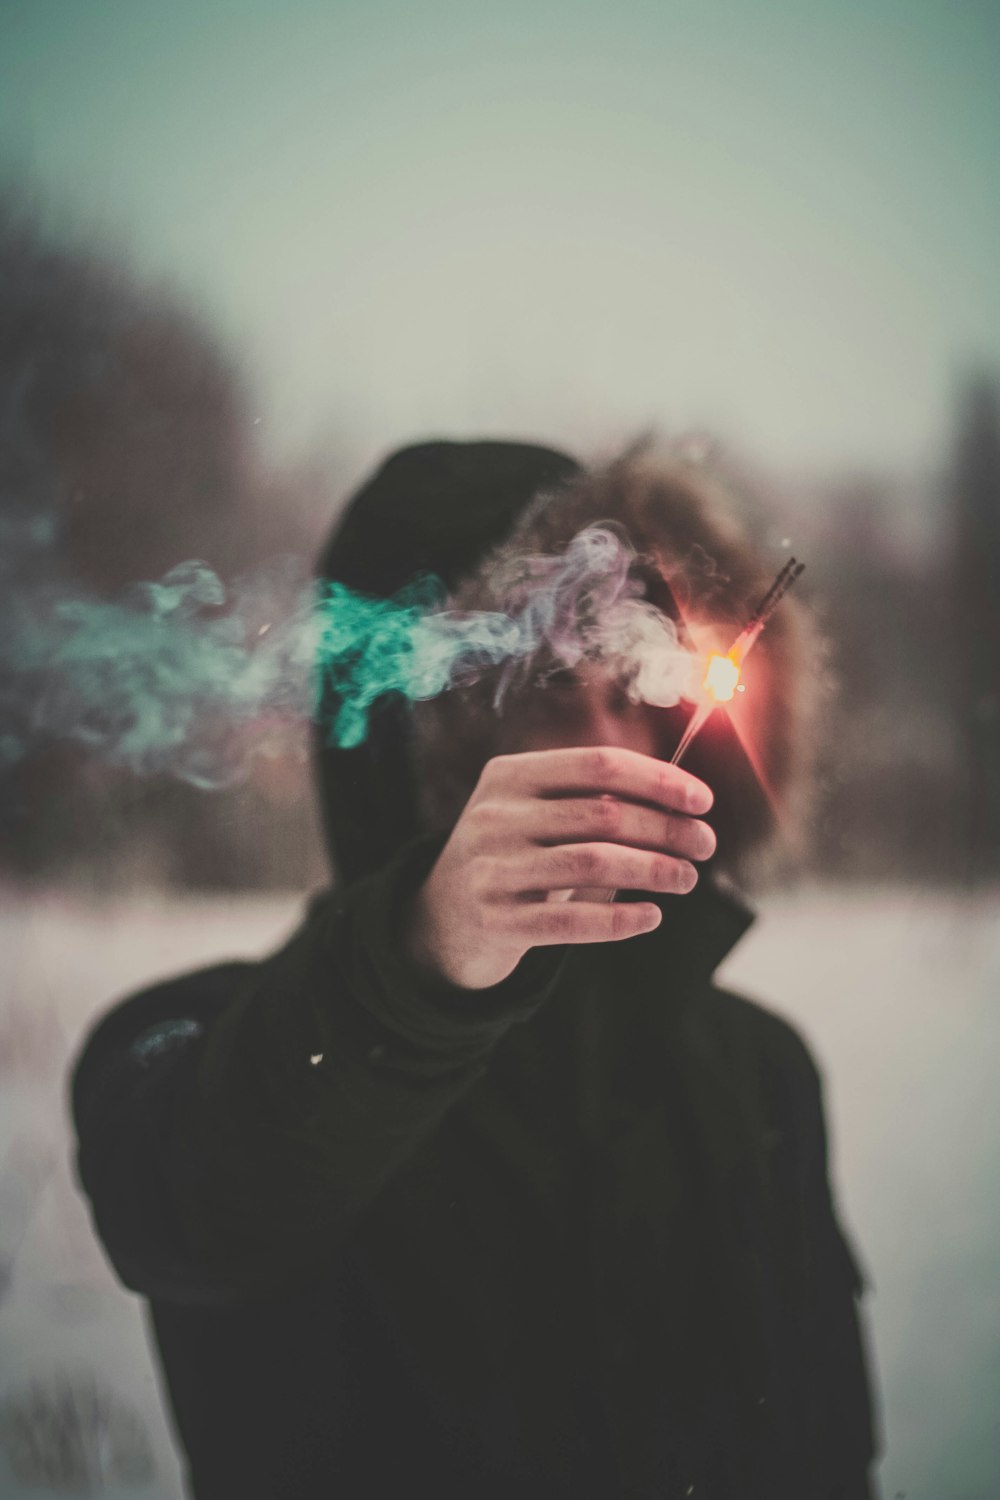 photo of person wearing hooded jacket holding lighted incense